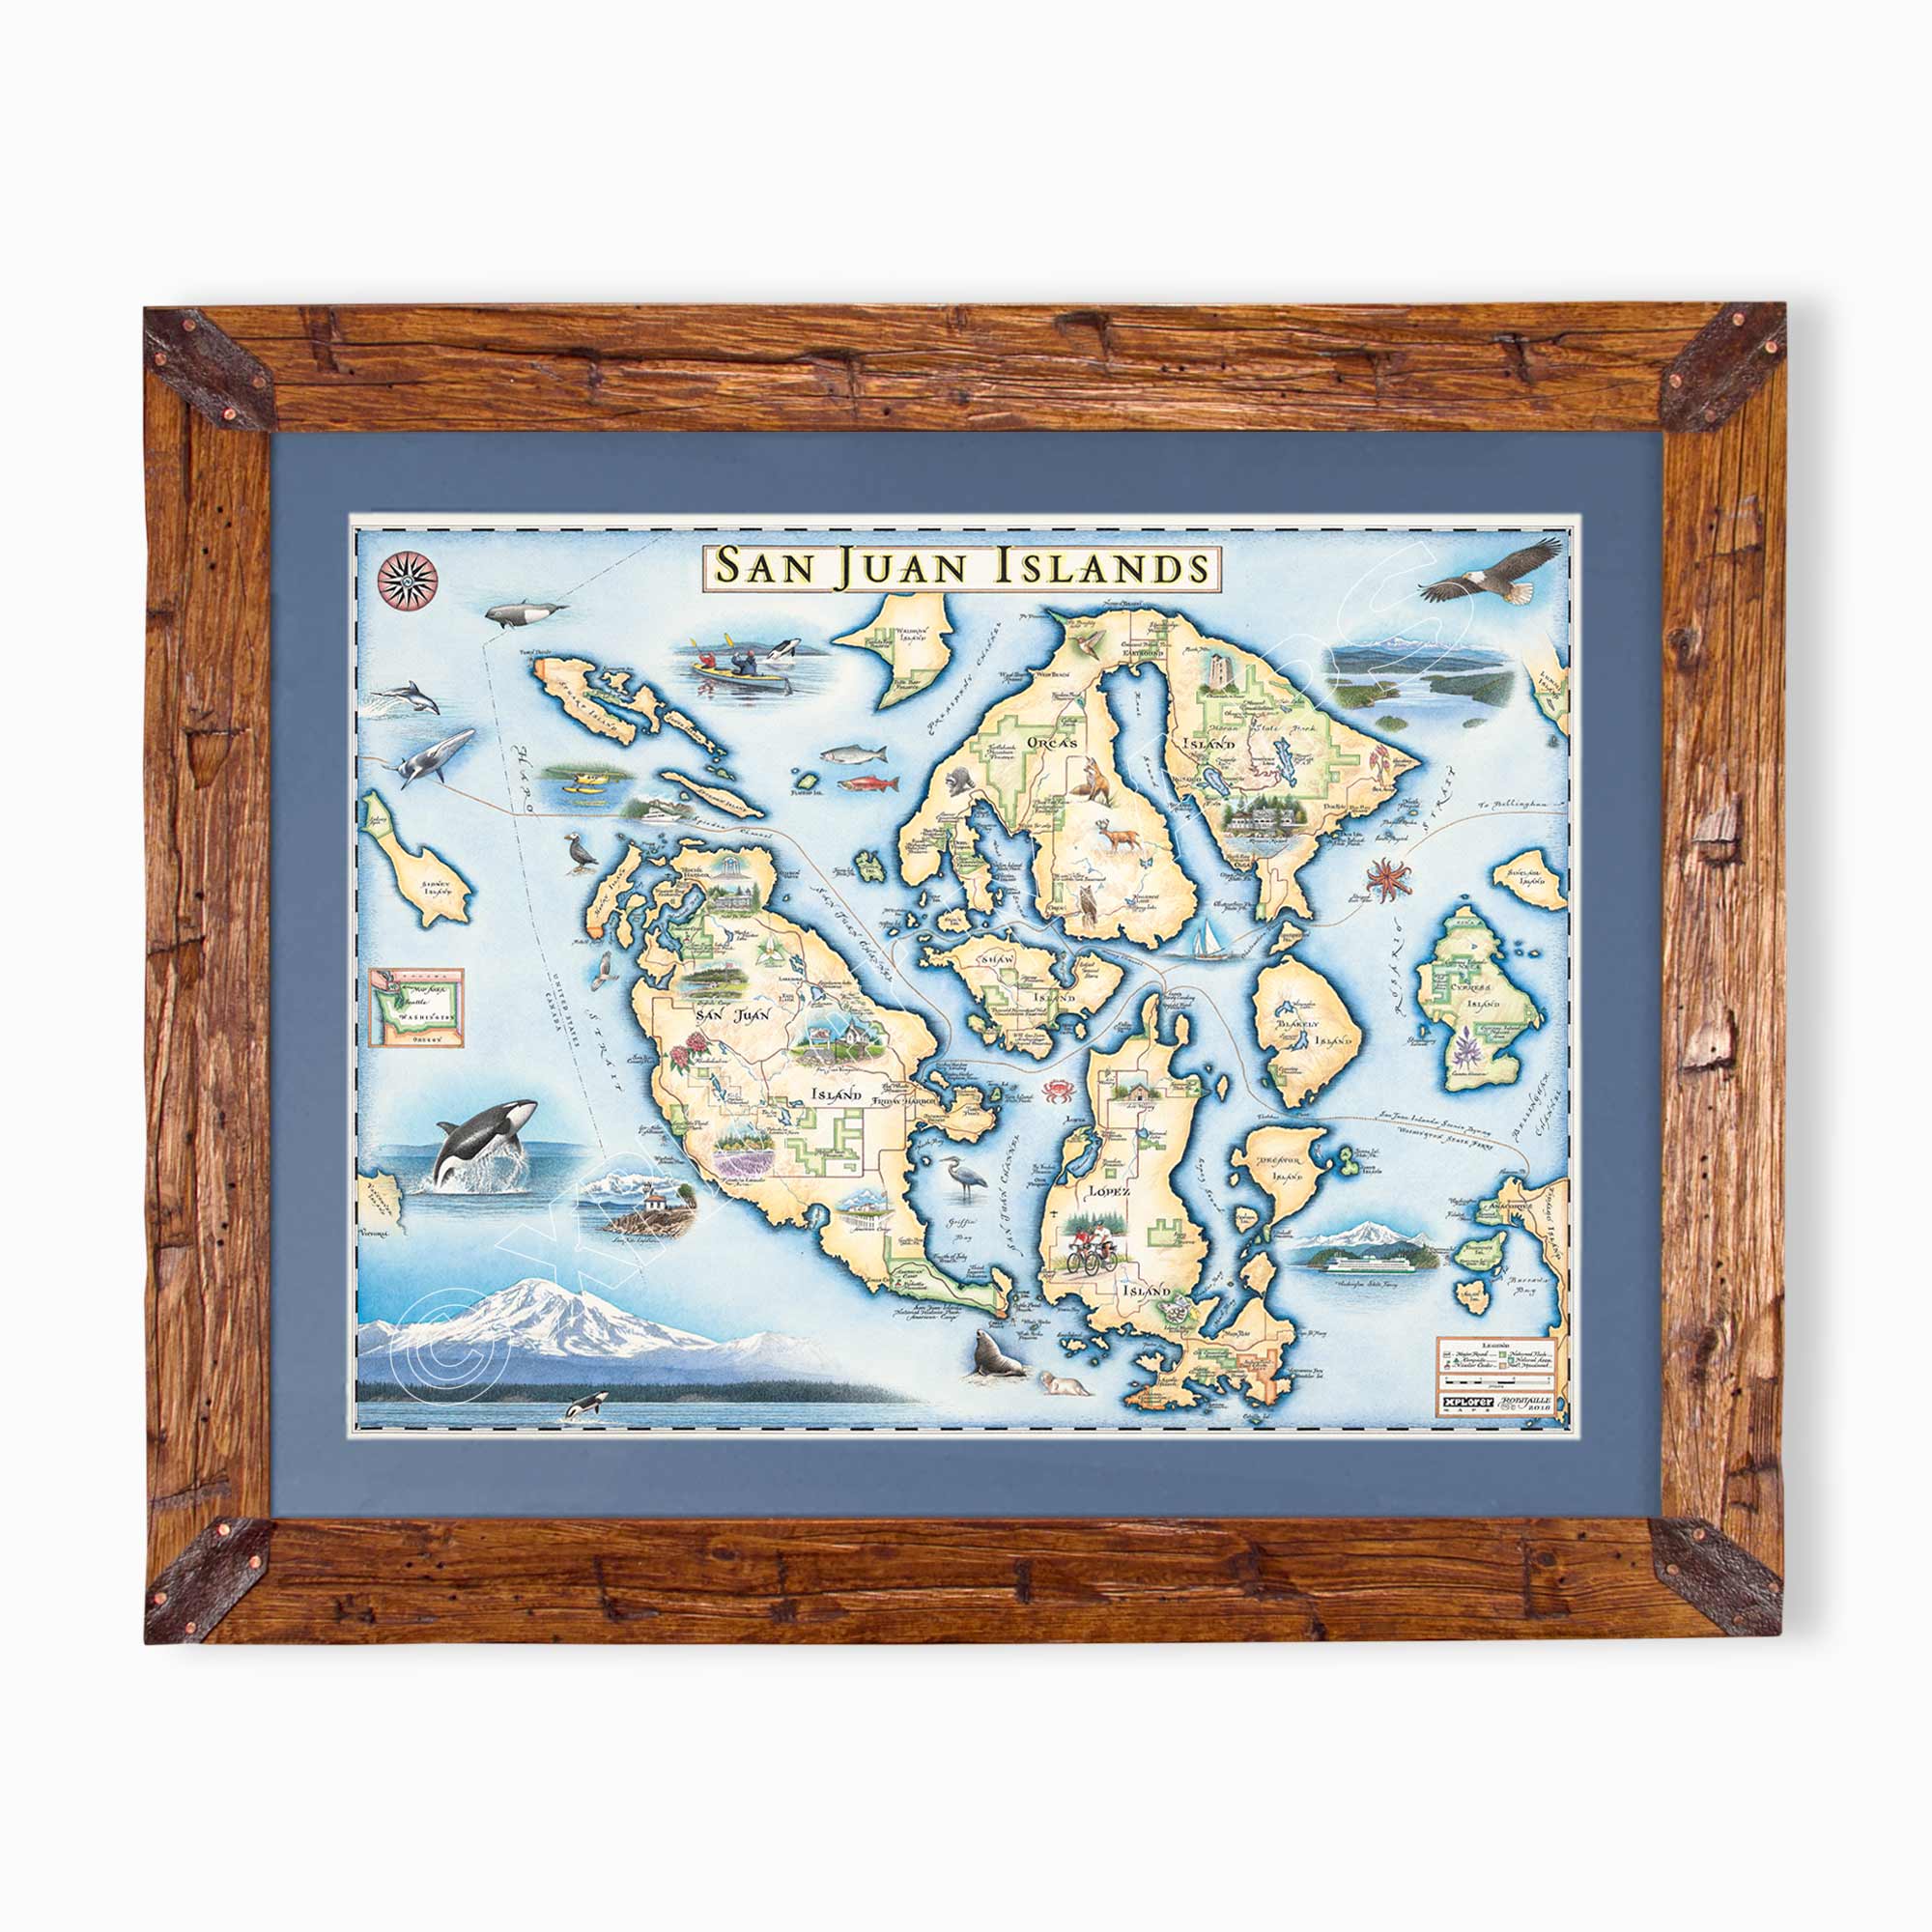 San Juan Islands hand-drawn map in earth tones blues and greens. The map print is framed in Montana hand-scraped pine with a blue mat.